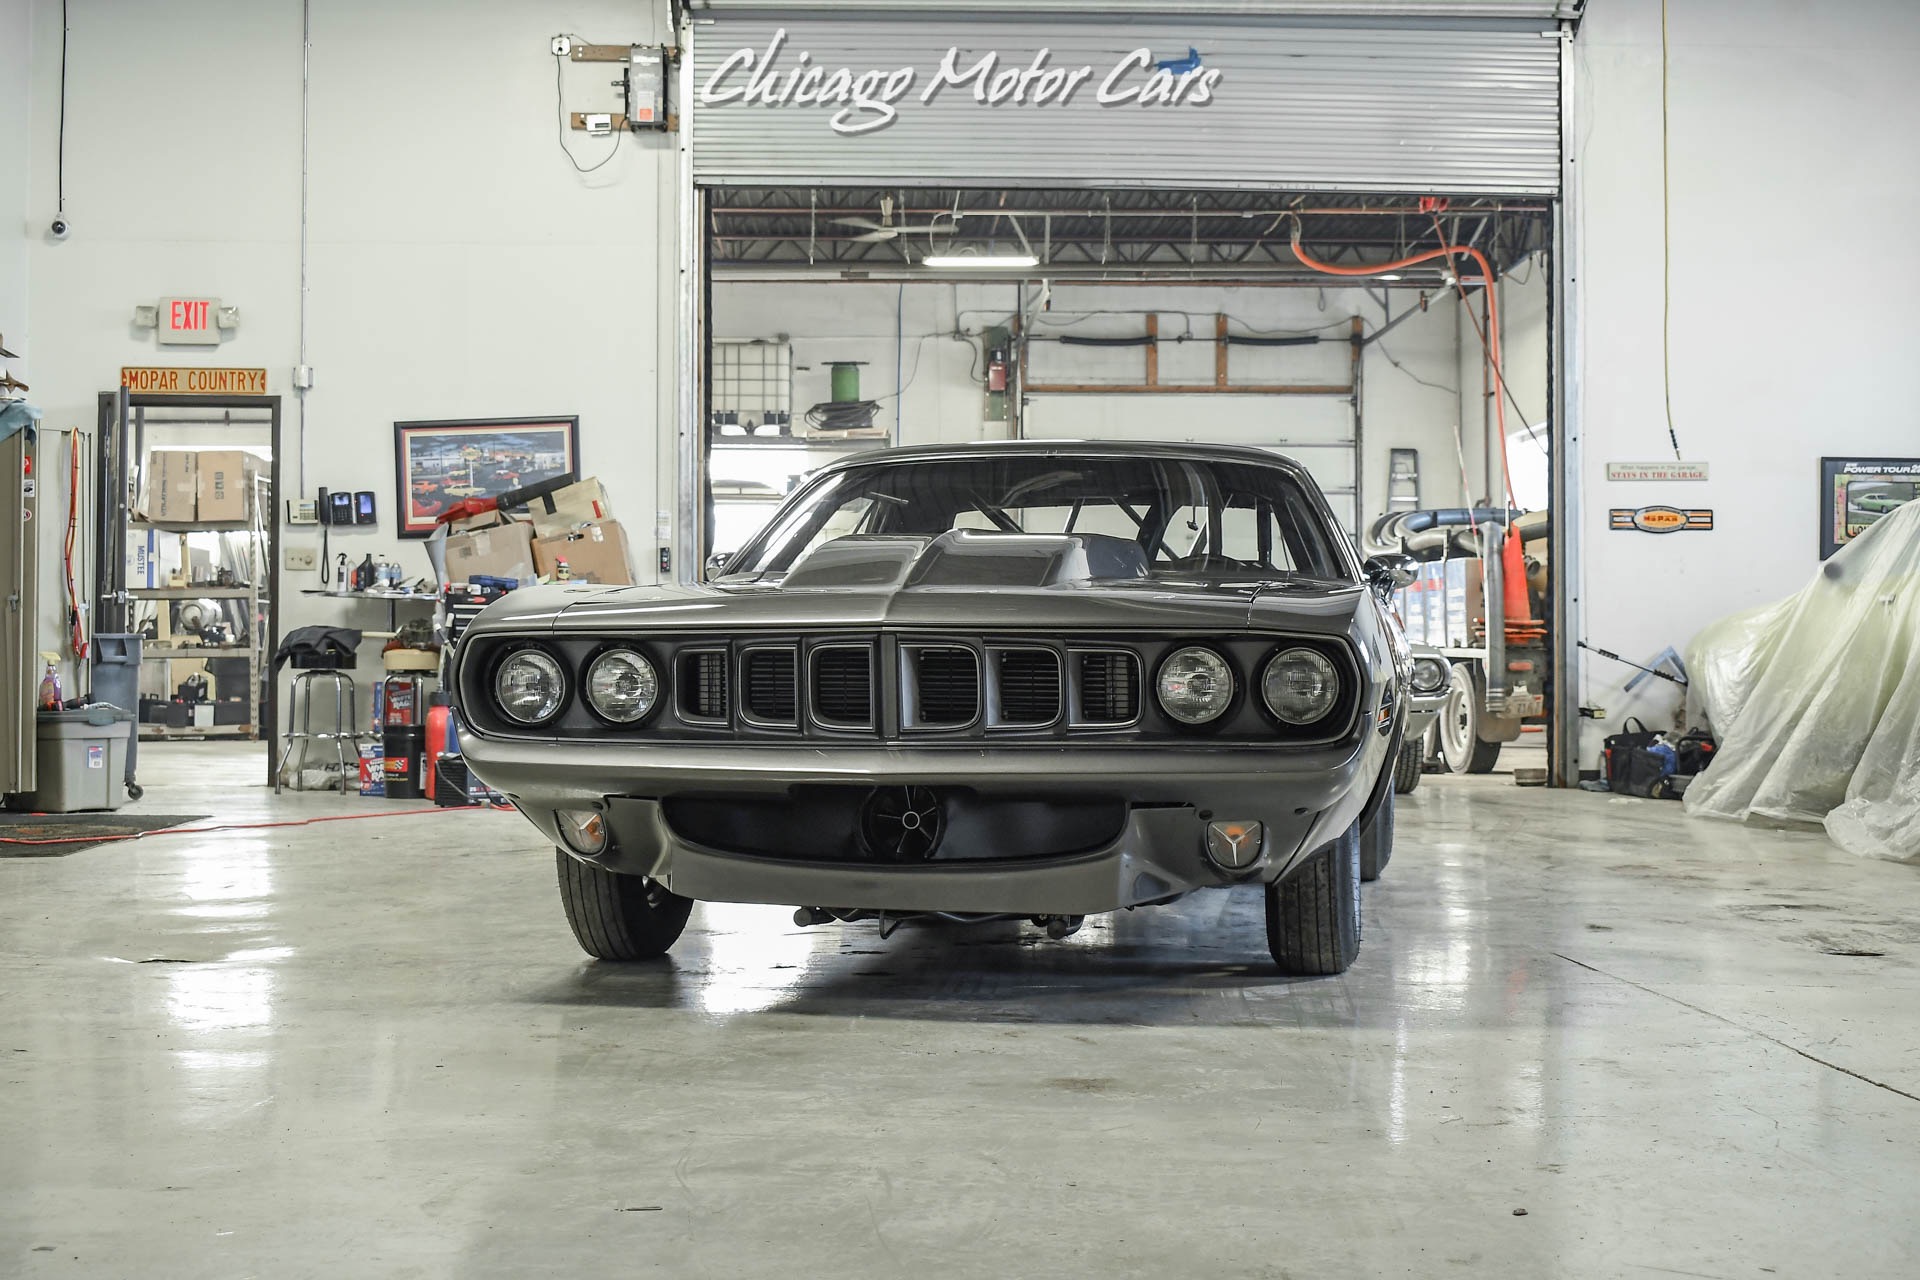 Used-1974-Plymouth-Cuda-Coupe-2400-HP-Build-Never-Tracked-Featured-in-RPM-Magazine-INCREDIBLE